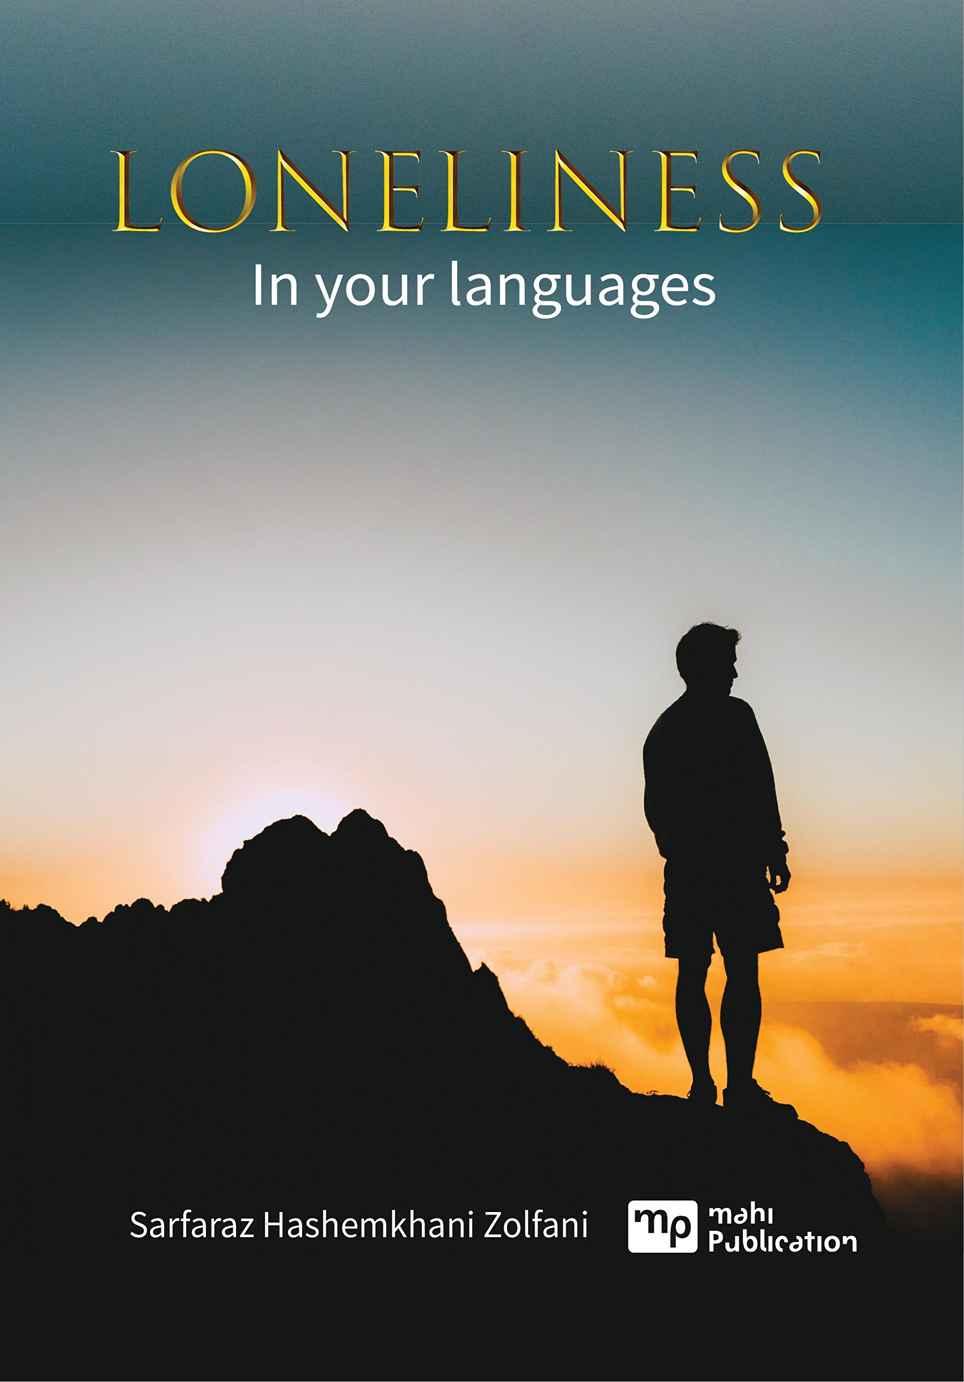  Loneliness In your languages